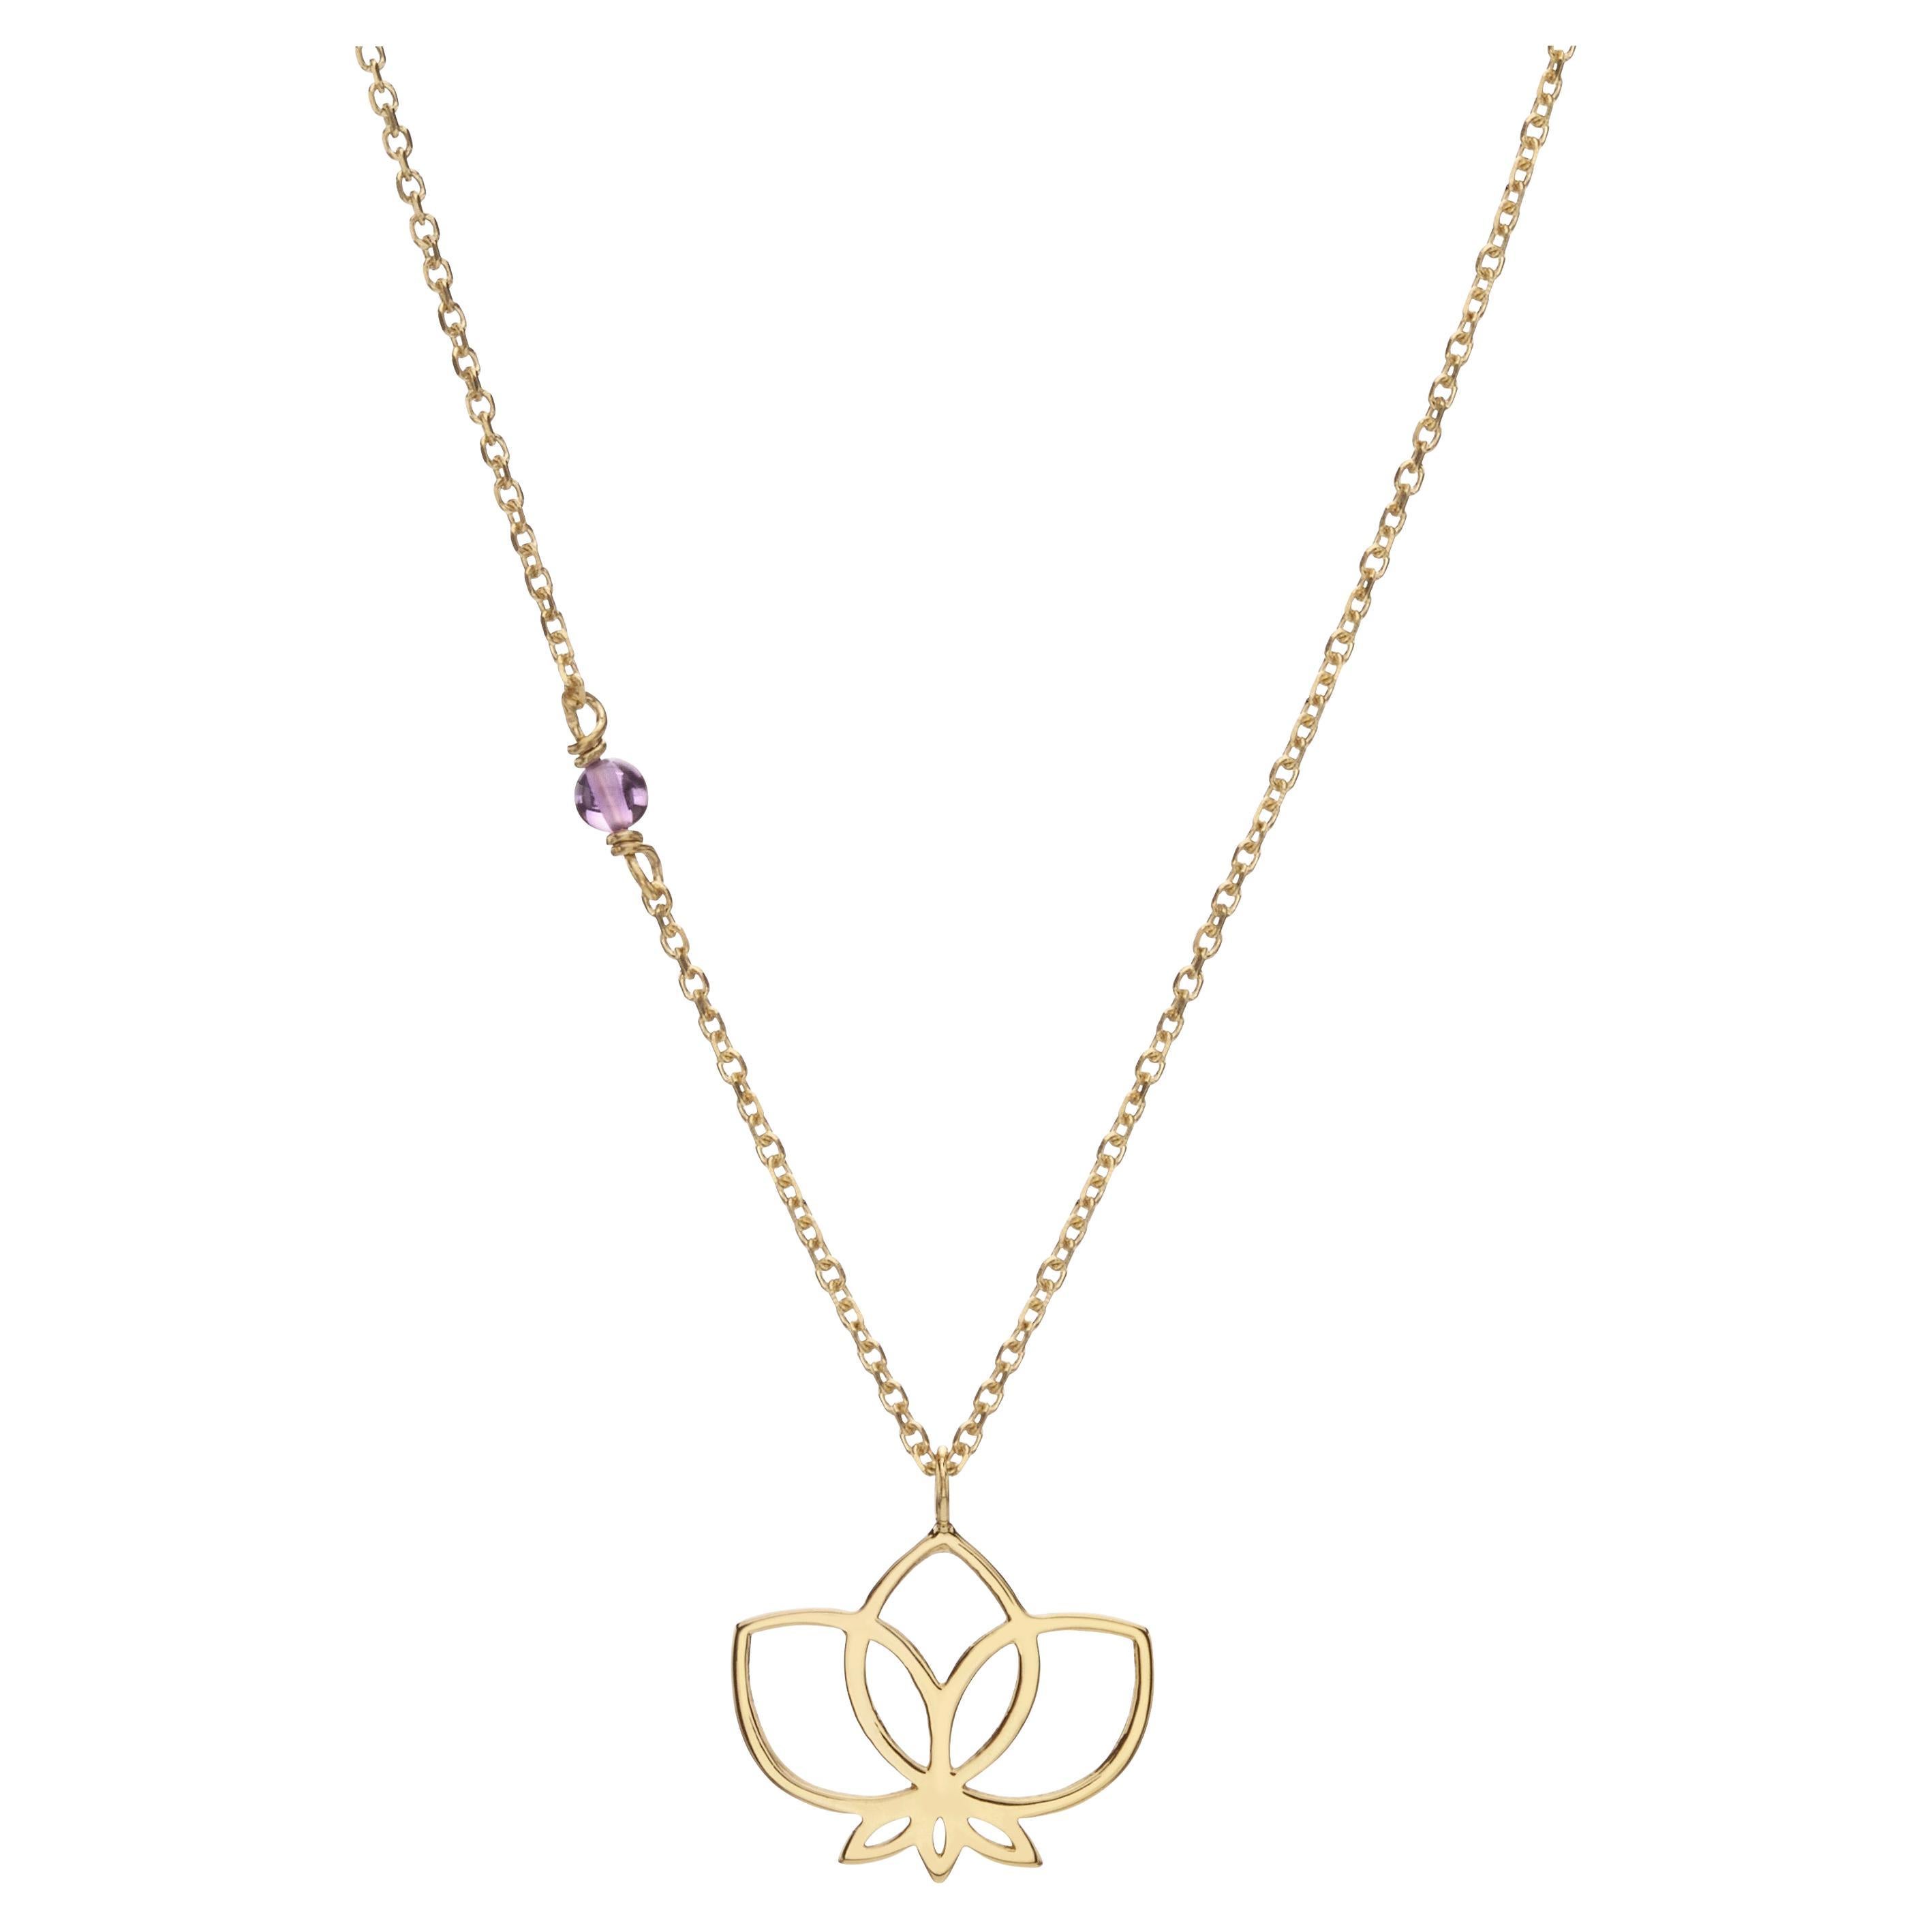 Handcrafted Lotus Pendant Necklace in 14Kt Gold with Round Amethyst For Sale